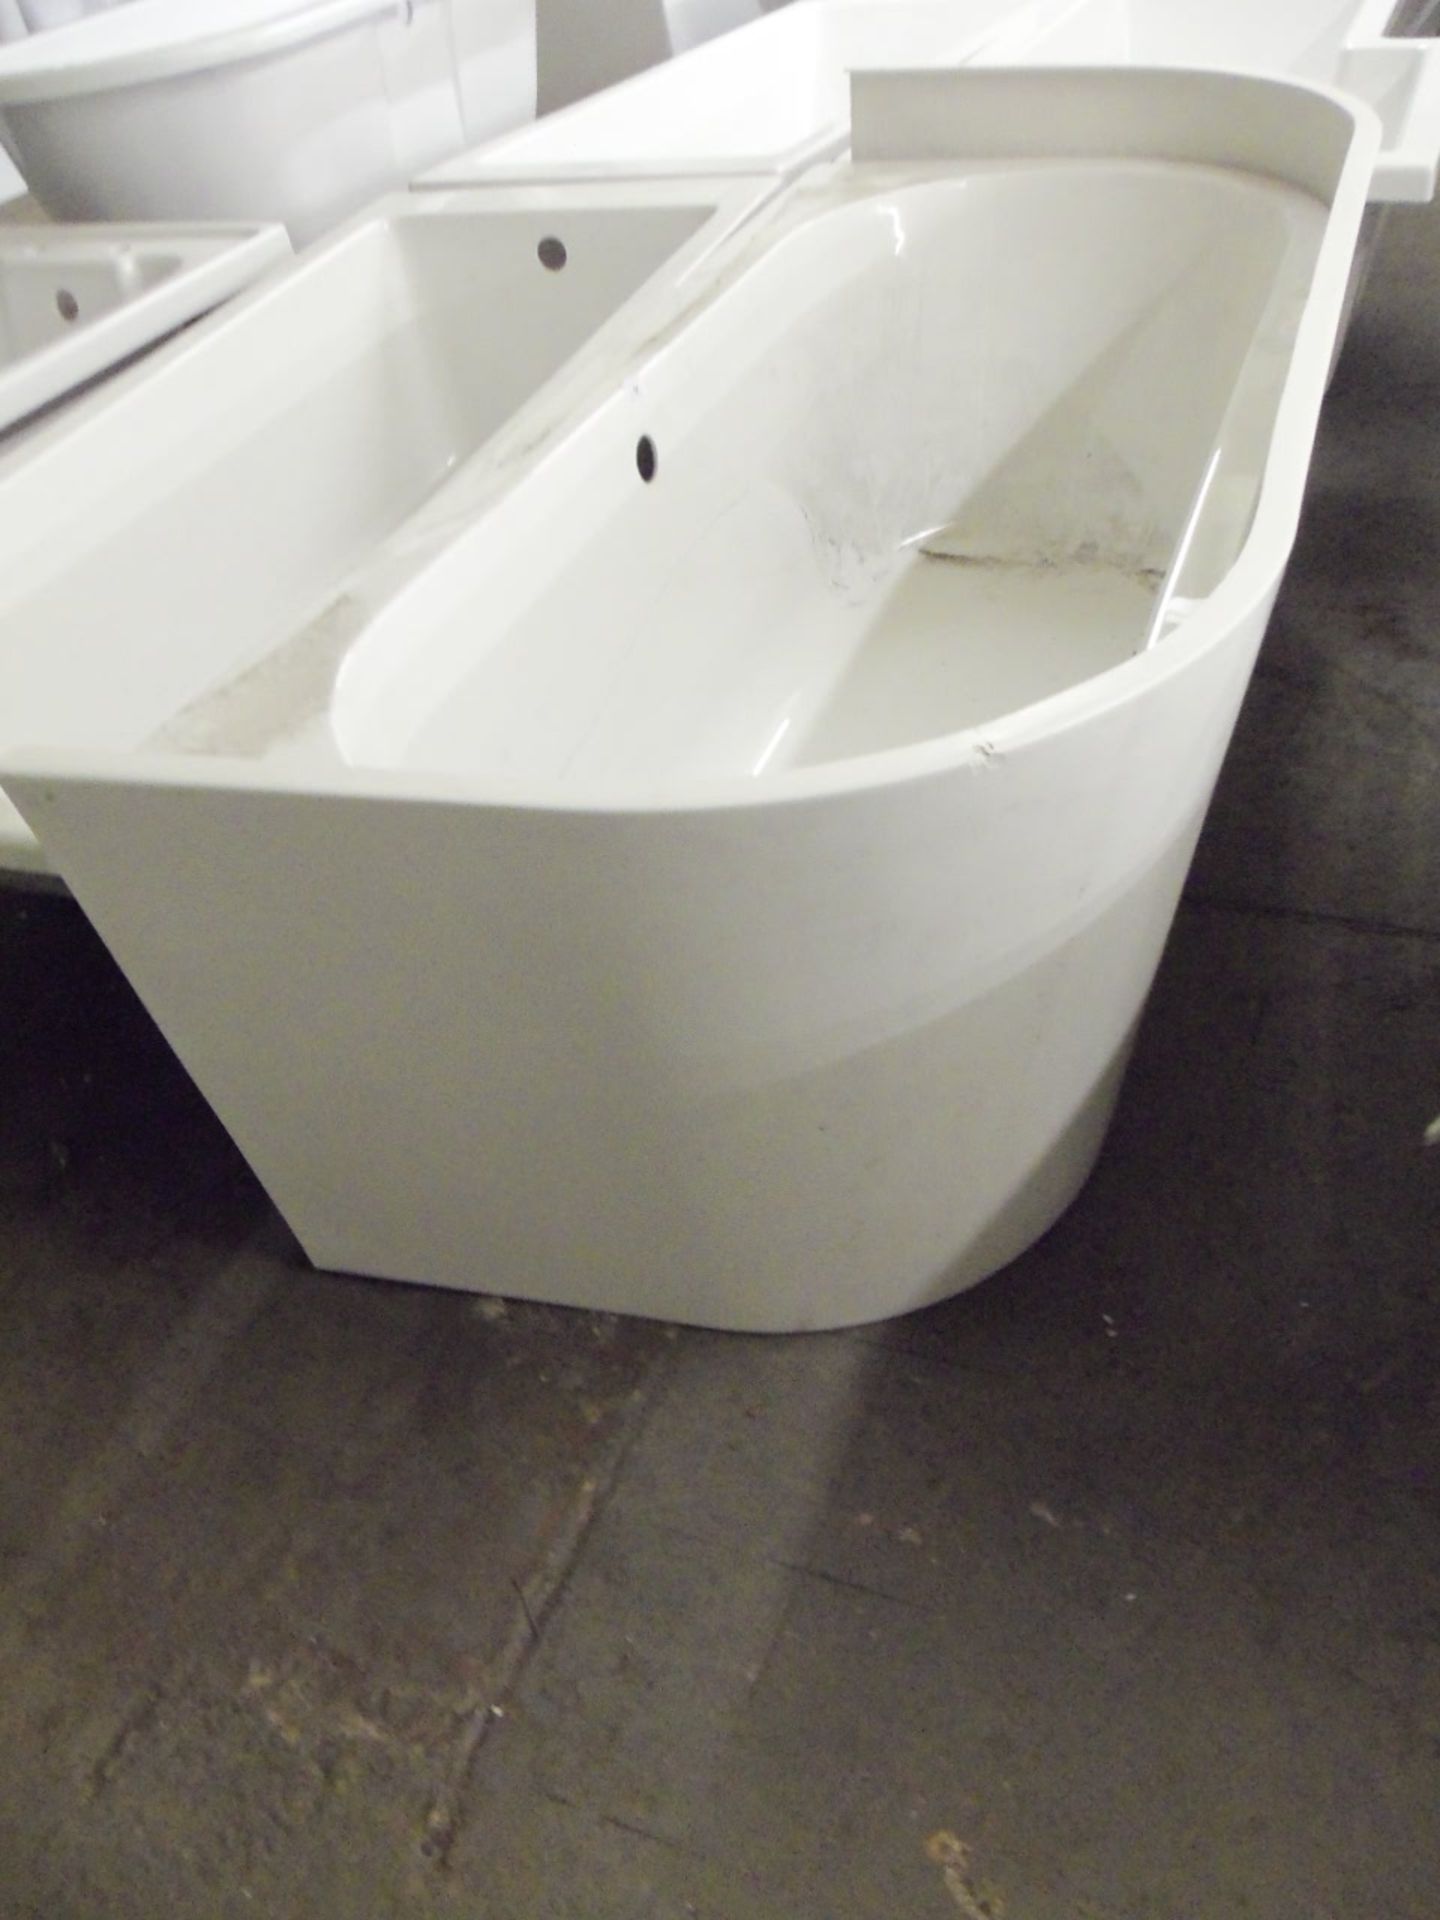 1700x750 D bath with front panel RRP £1200